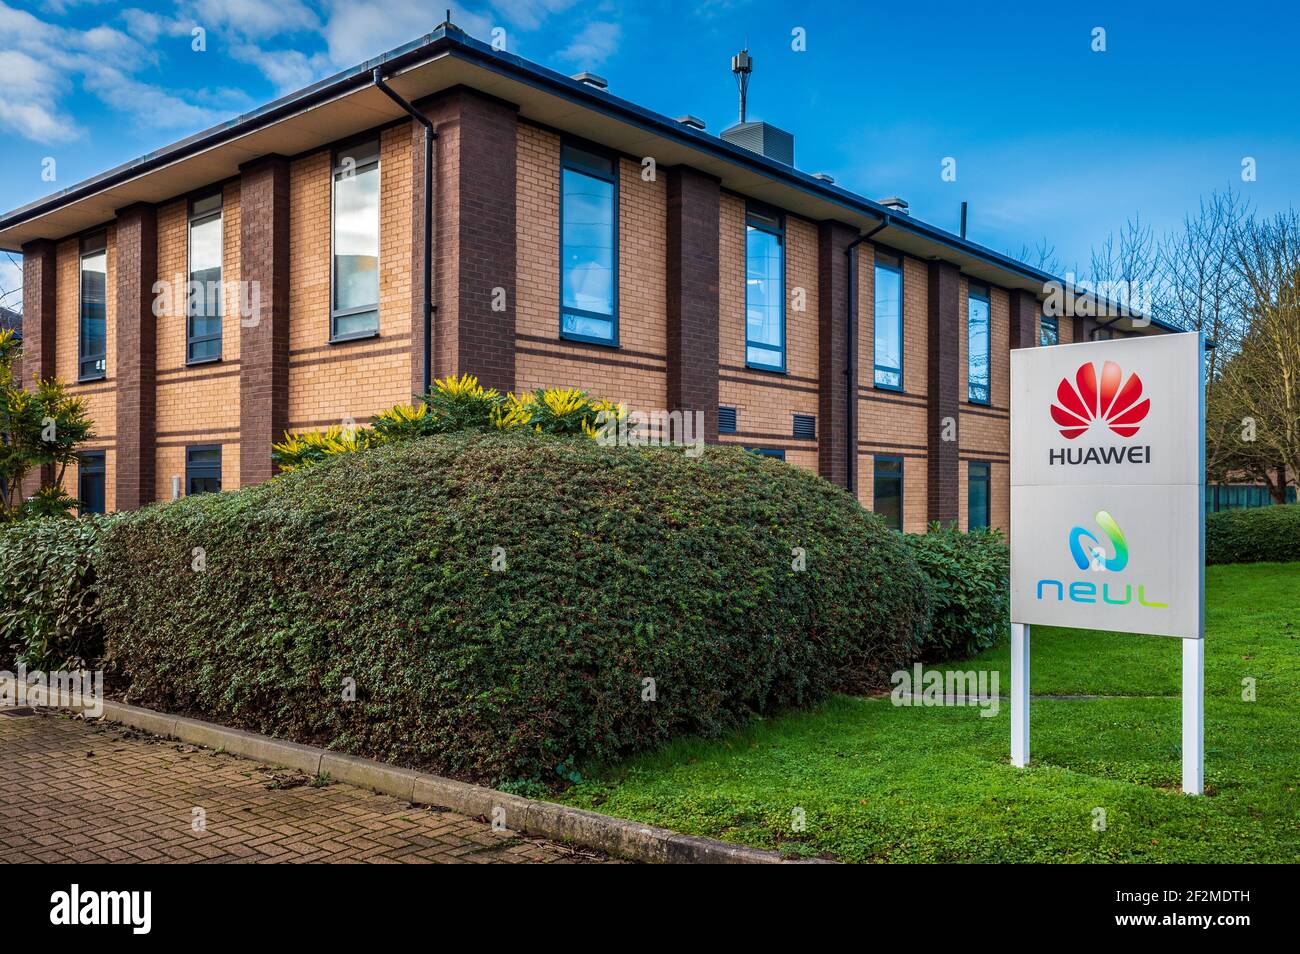 Huawei UK. Huawei Technologies Research & Development, Cambridge Science Park, Cambridge housing the Huawei owned Neul Internet of Things IoT company. Stock Photo